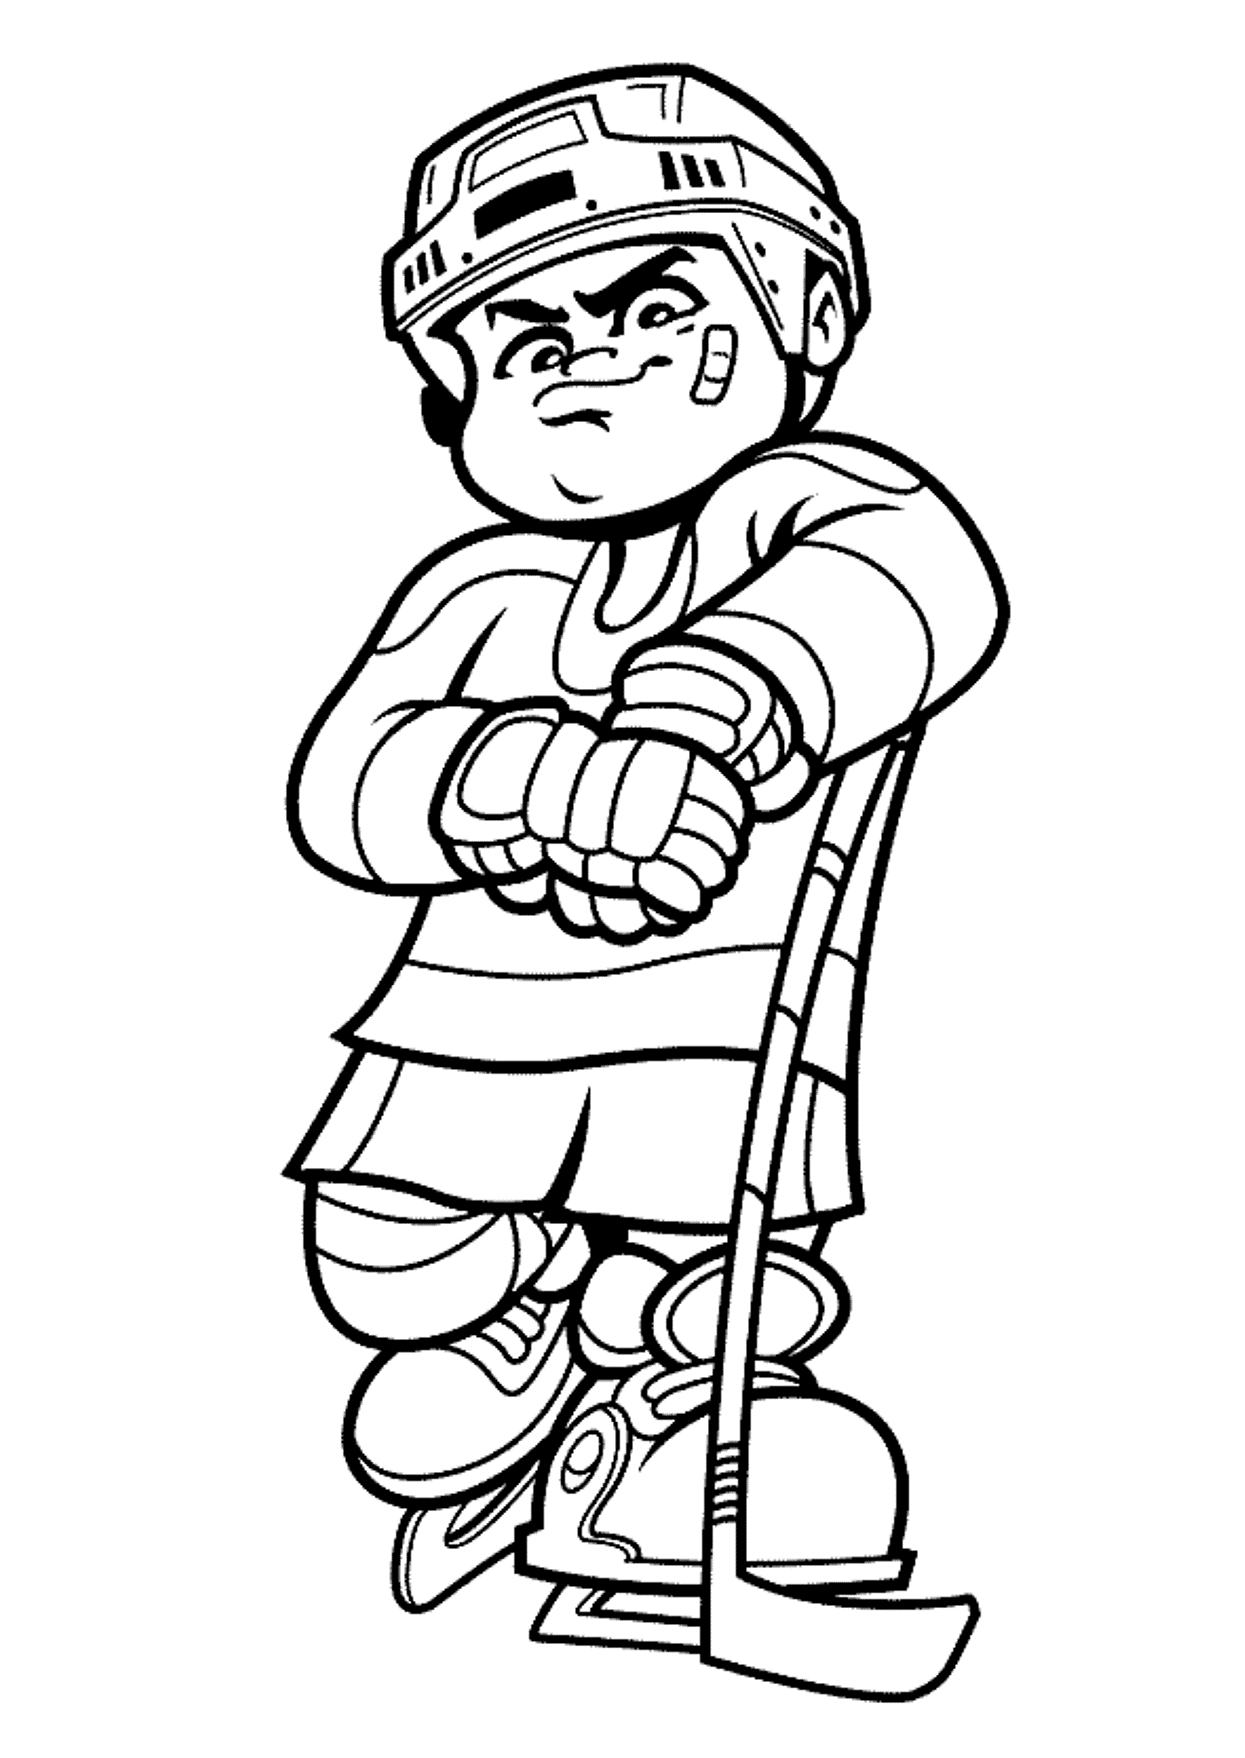 hockey coloring pages for boys Coloring4free